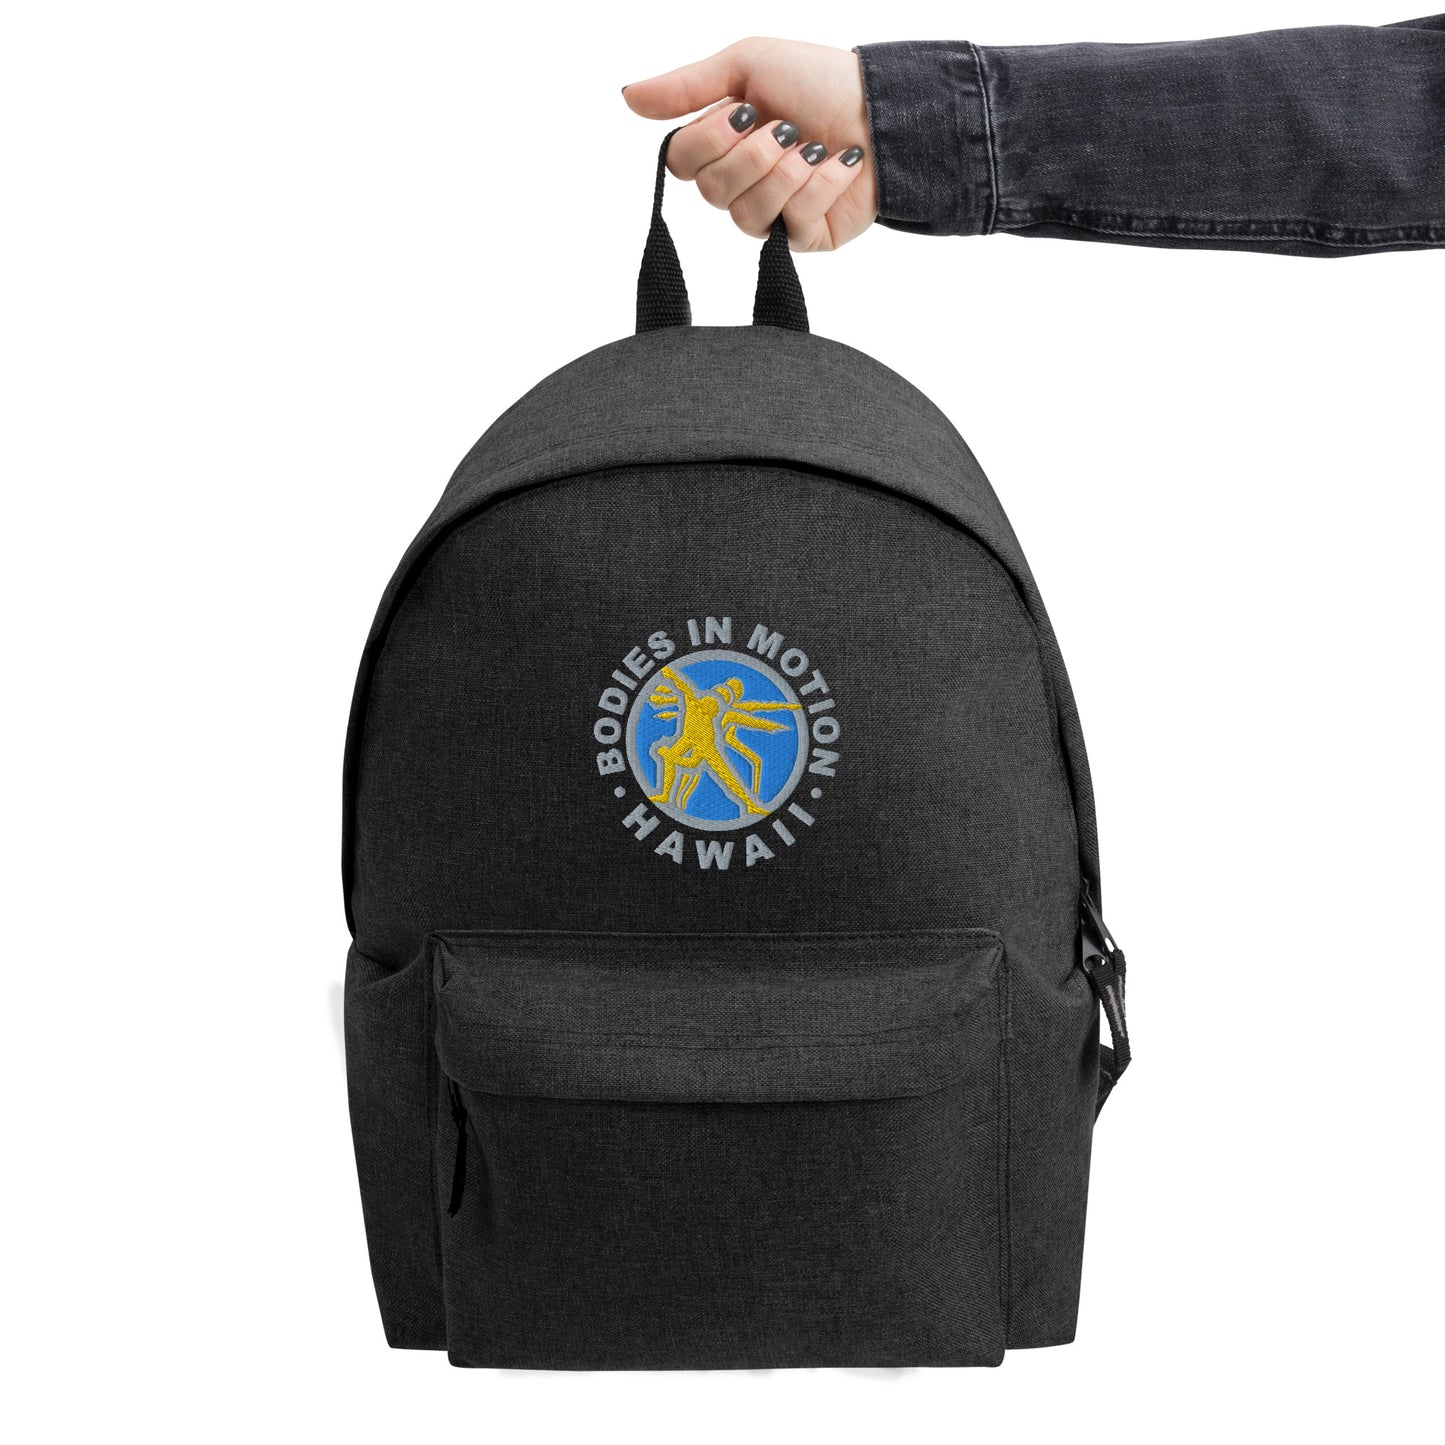 Bodies in Motion Embroidered Backpack